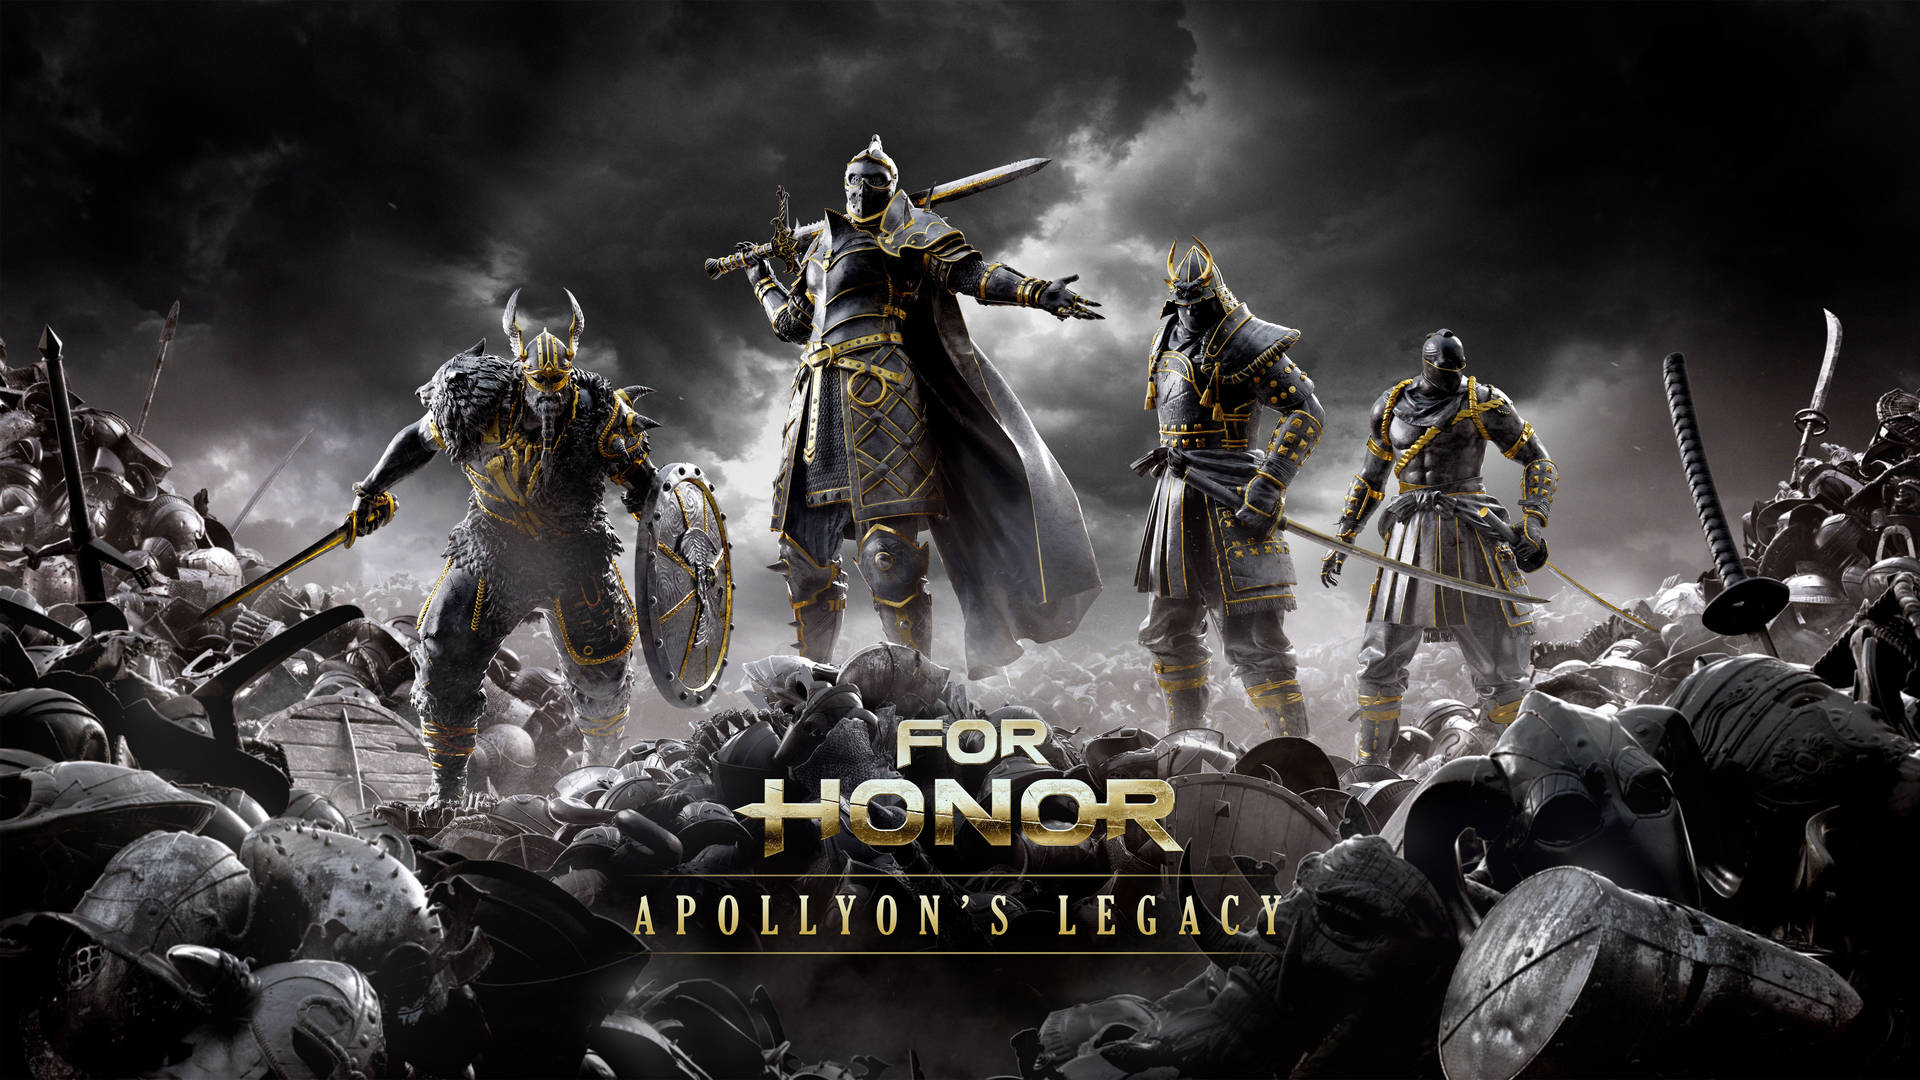 For Honor Apollyon's Legacy Poster Background